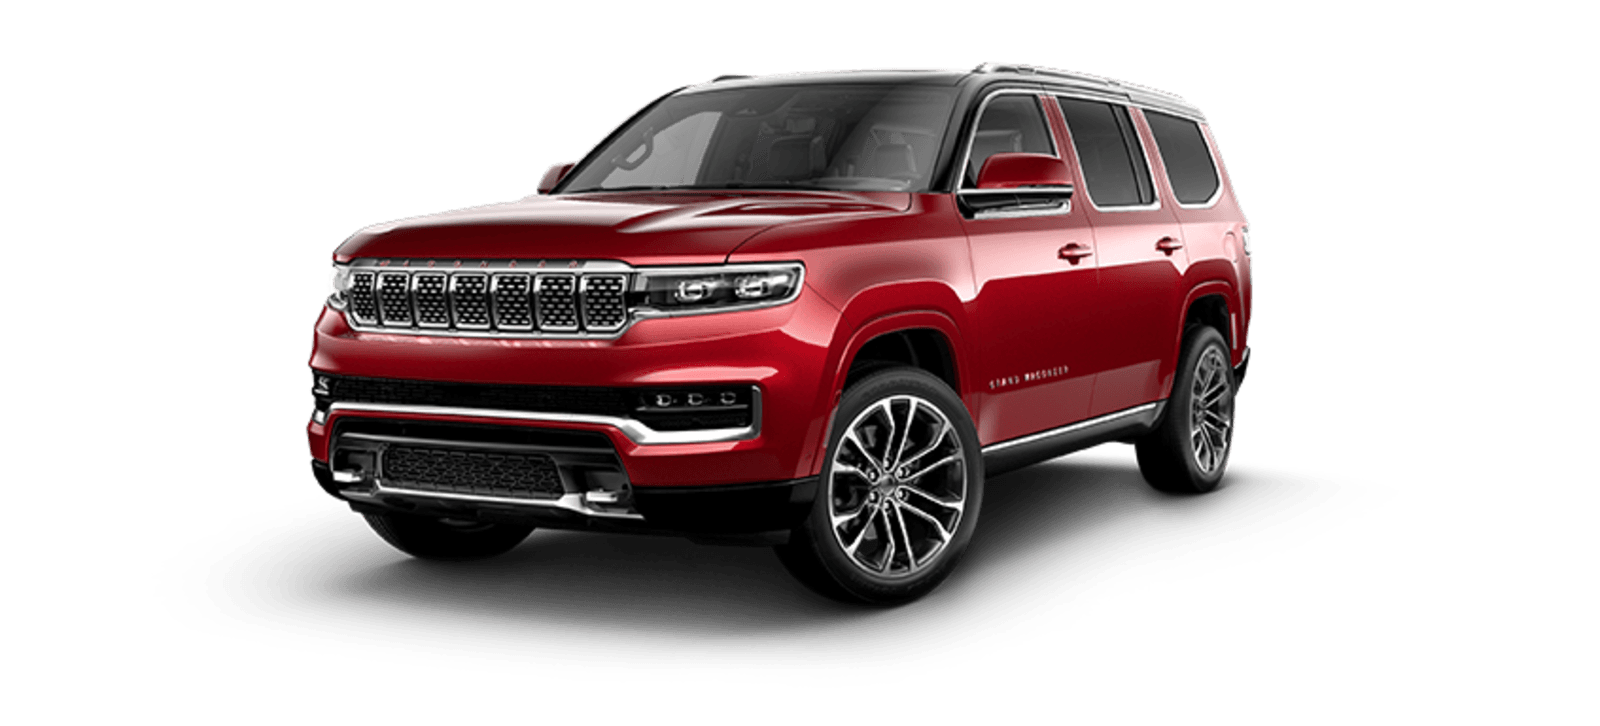 2021 Jeep Wagoneer Full View in Velvet Red Pearl with Wheels